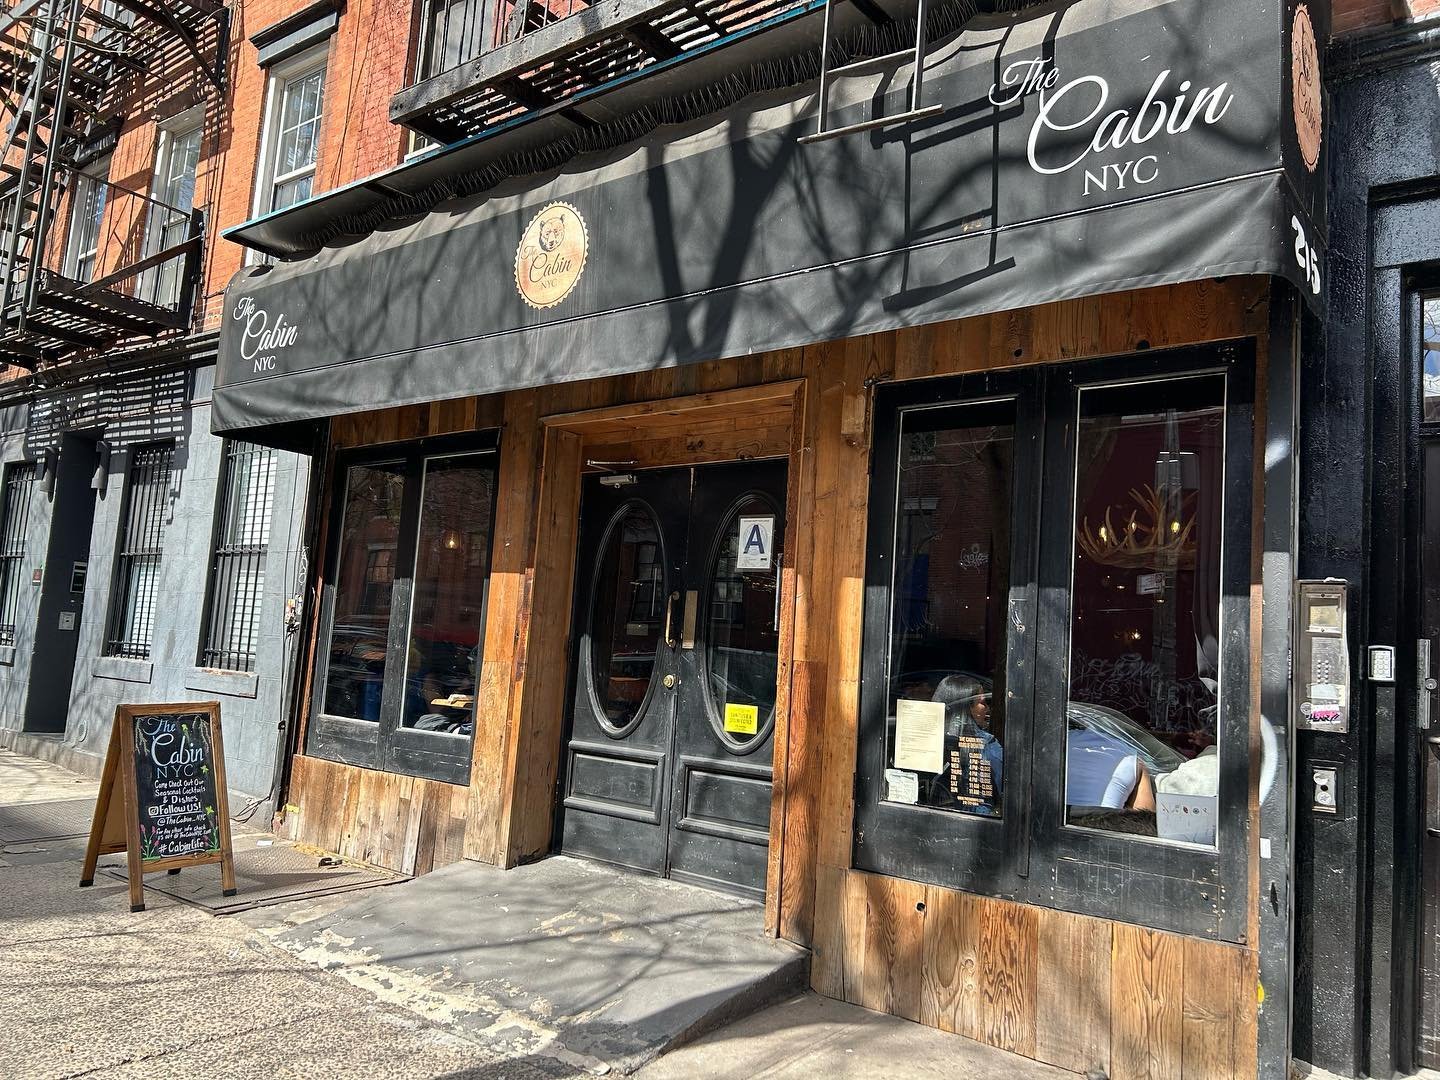 A drink &amp; some food @thecabin_nyc &amp; a tattoo @eastvillagetattoo 
Great Spring day on 4th Street in the EV
The Cabin NYC: 205 e 4th St
East Village Tattoo: 207 e 4th St